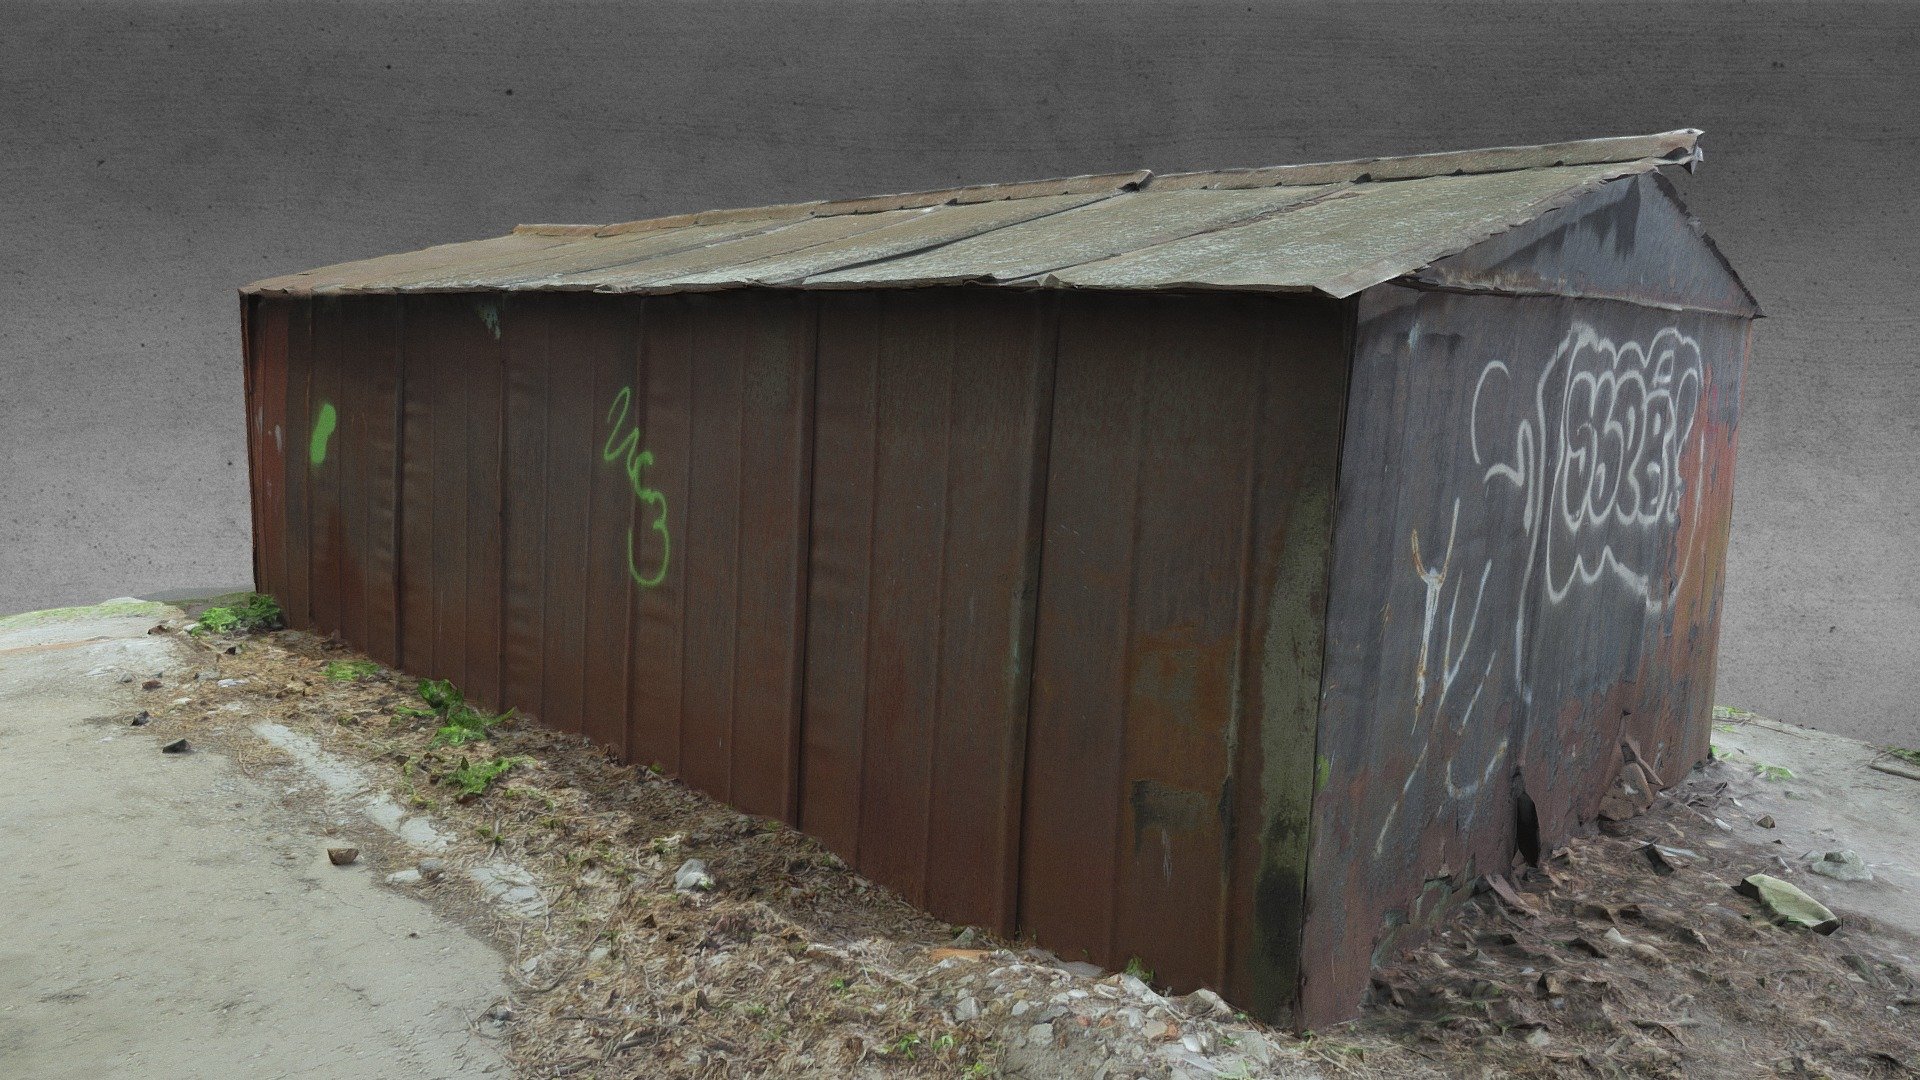 Very simple, old, rusty metal garage built probably in the Soviet Union.
Simple grafitti on walls 3d model